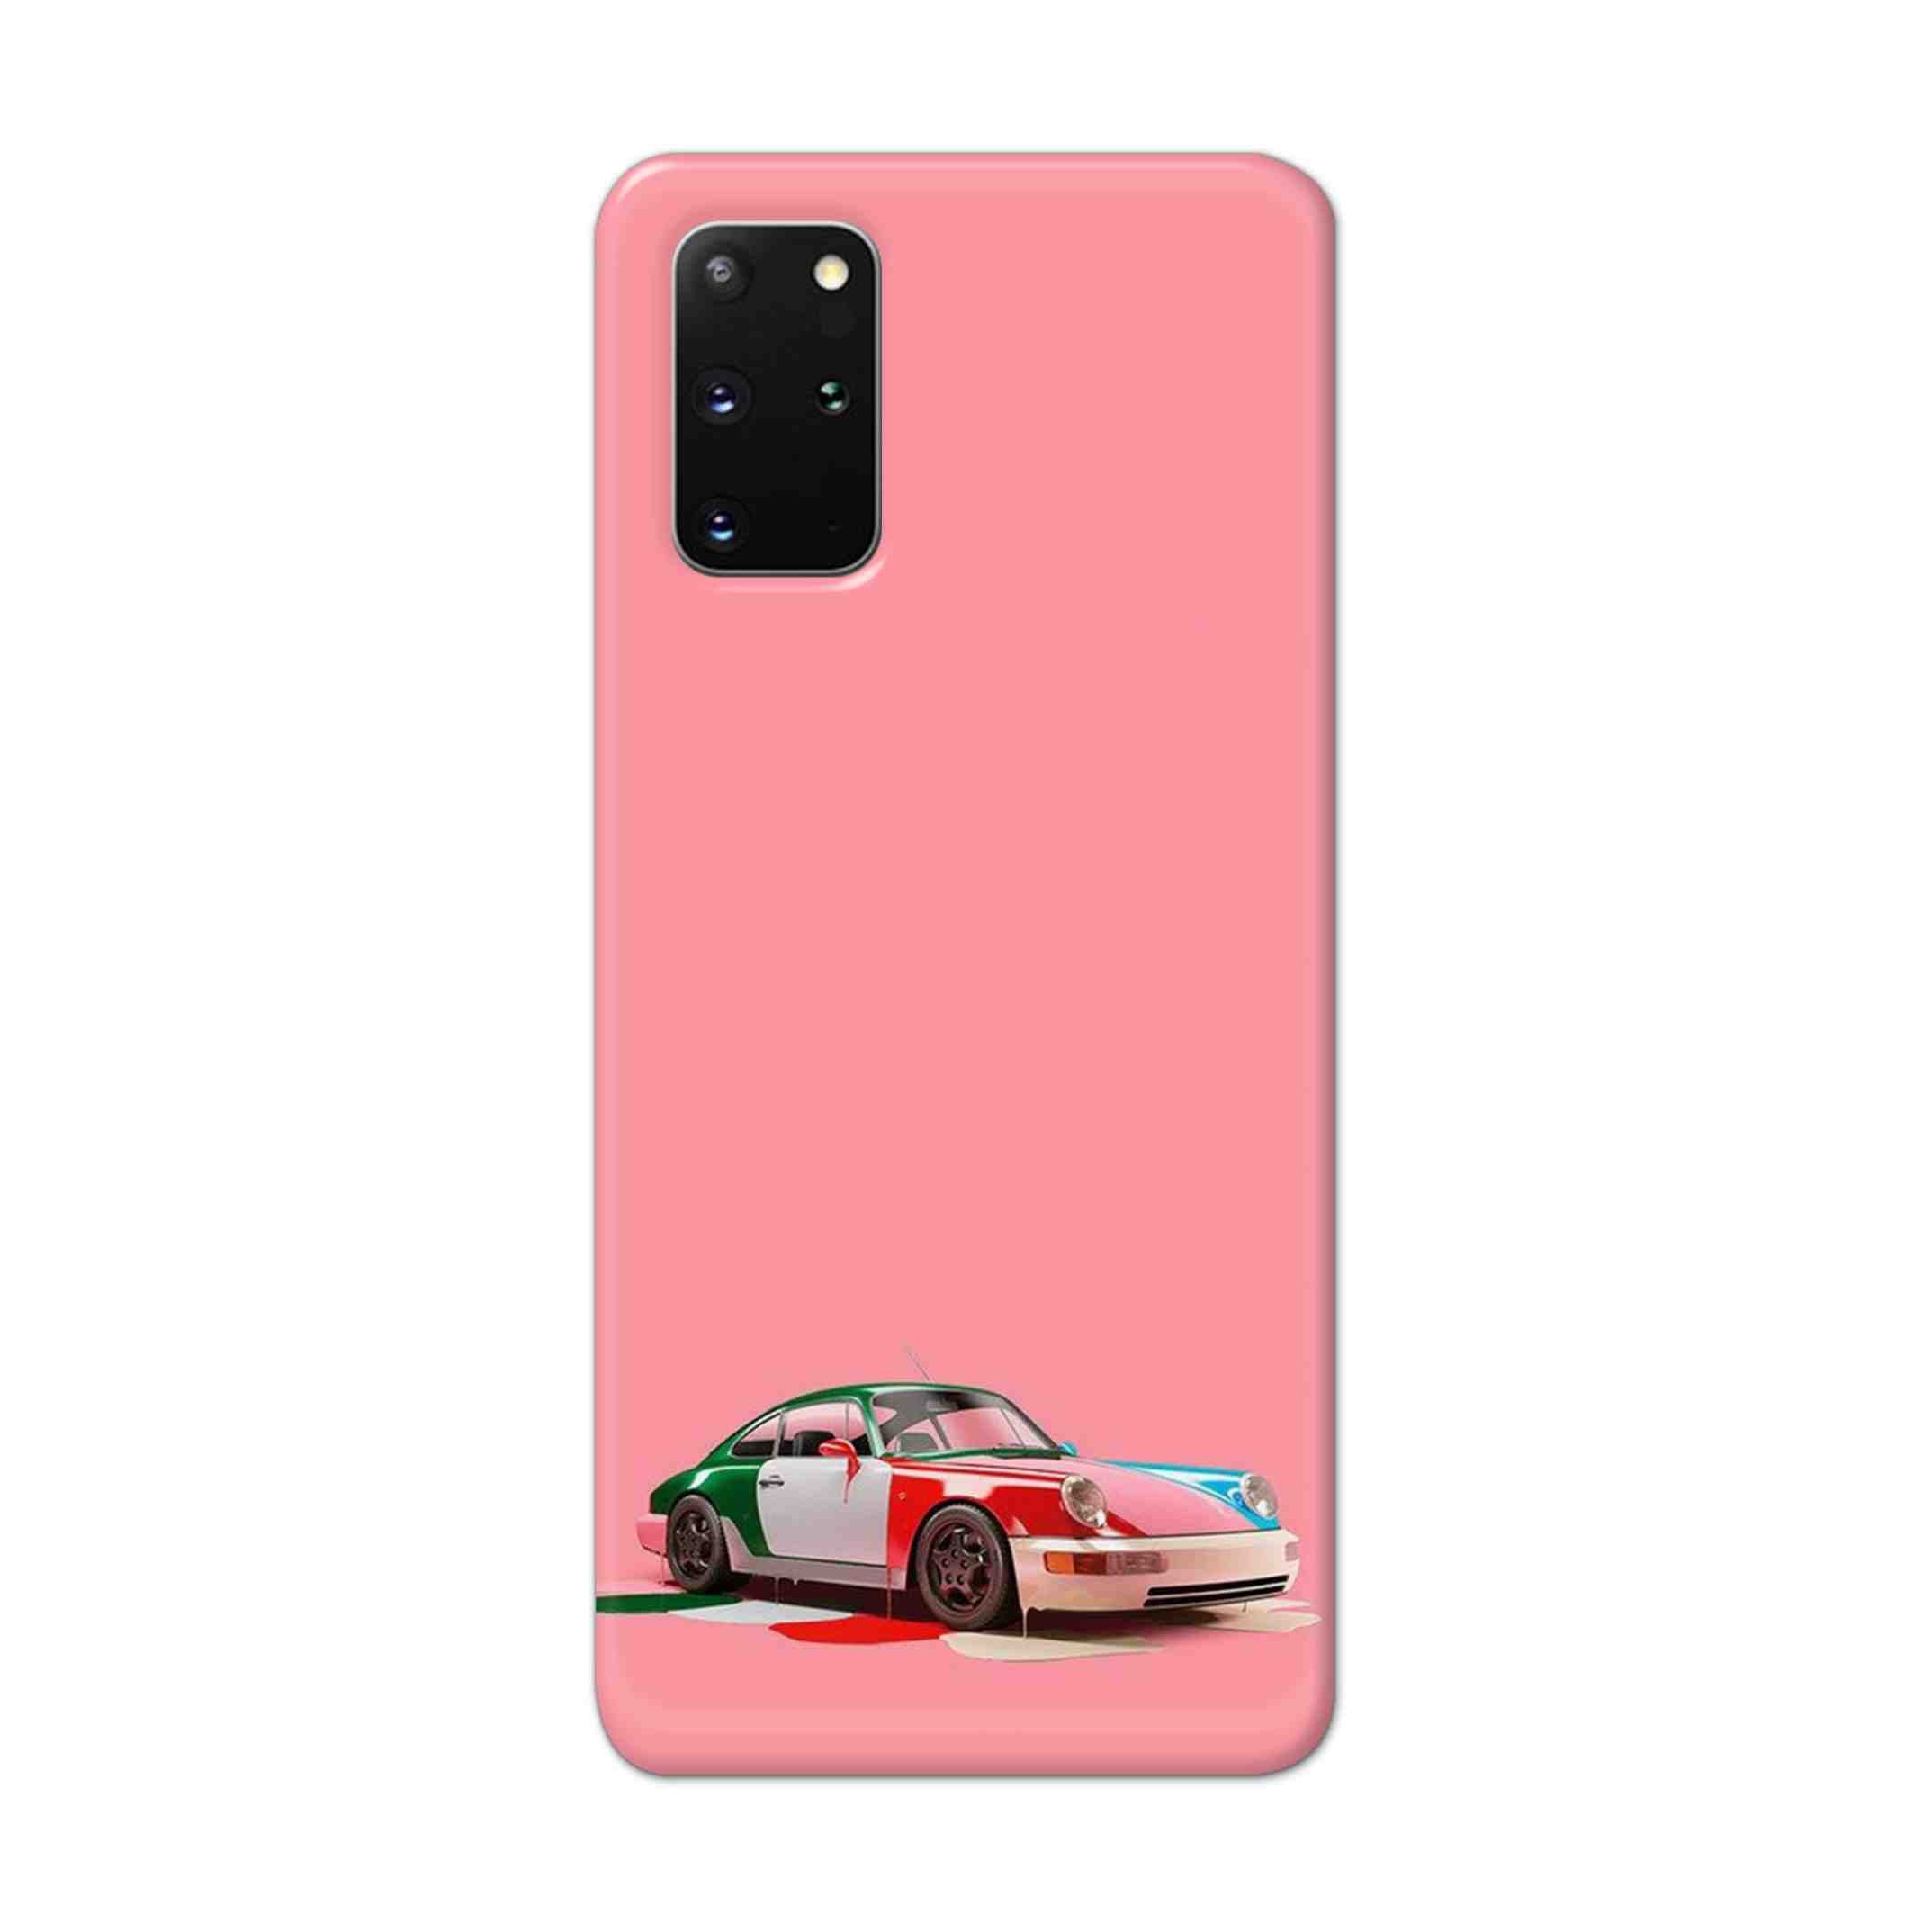 Buy Pink Porche Hard Back Mobile Phone Case Cover For Samsung Galaxy S20 Plus Online